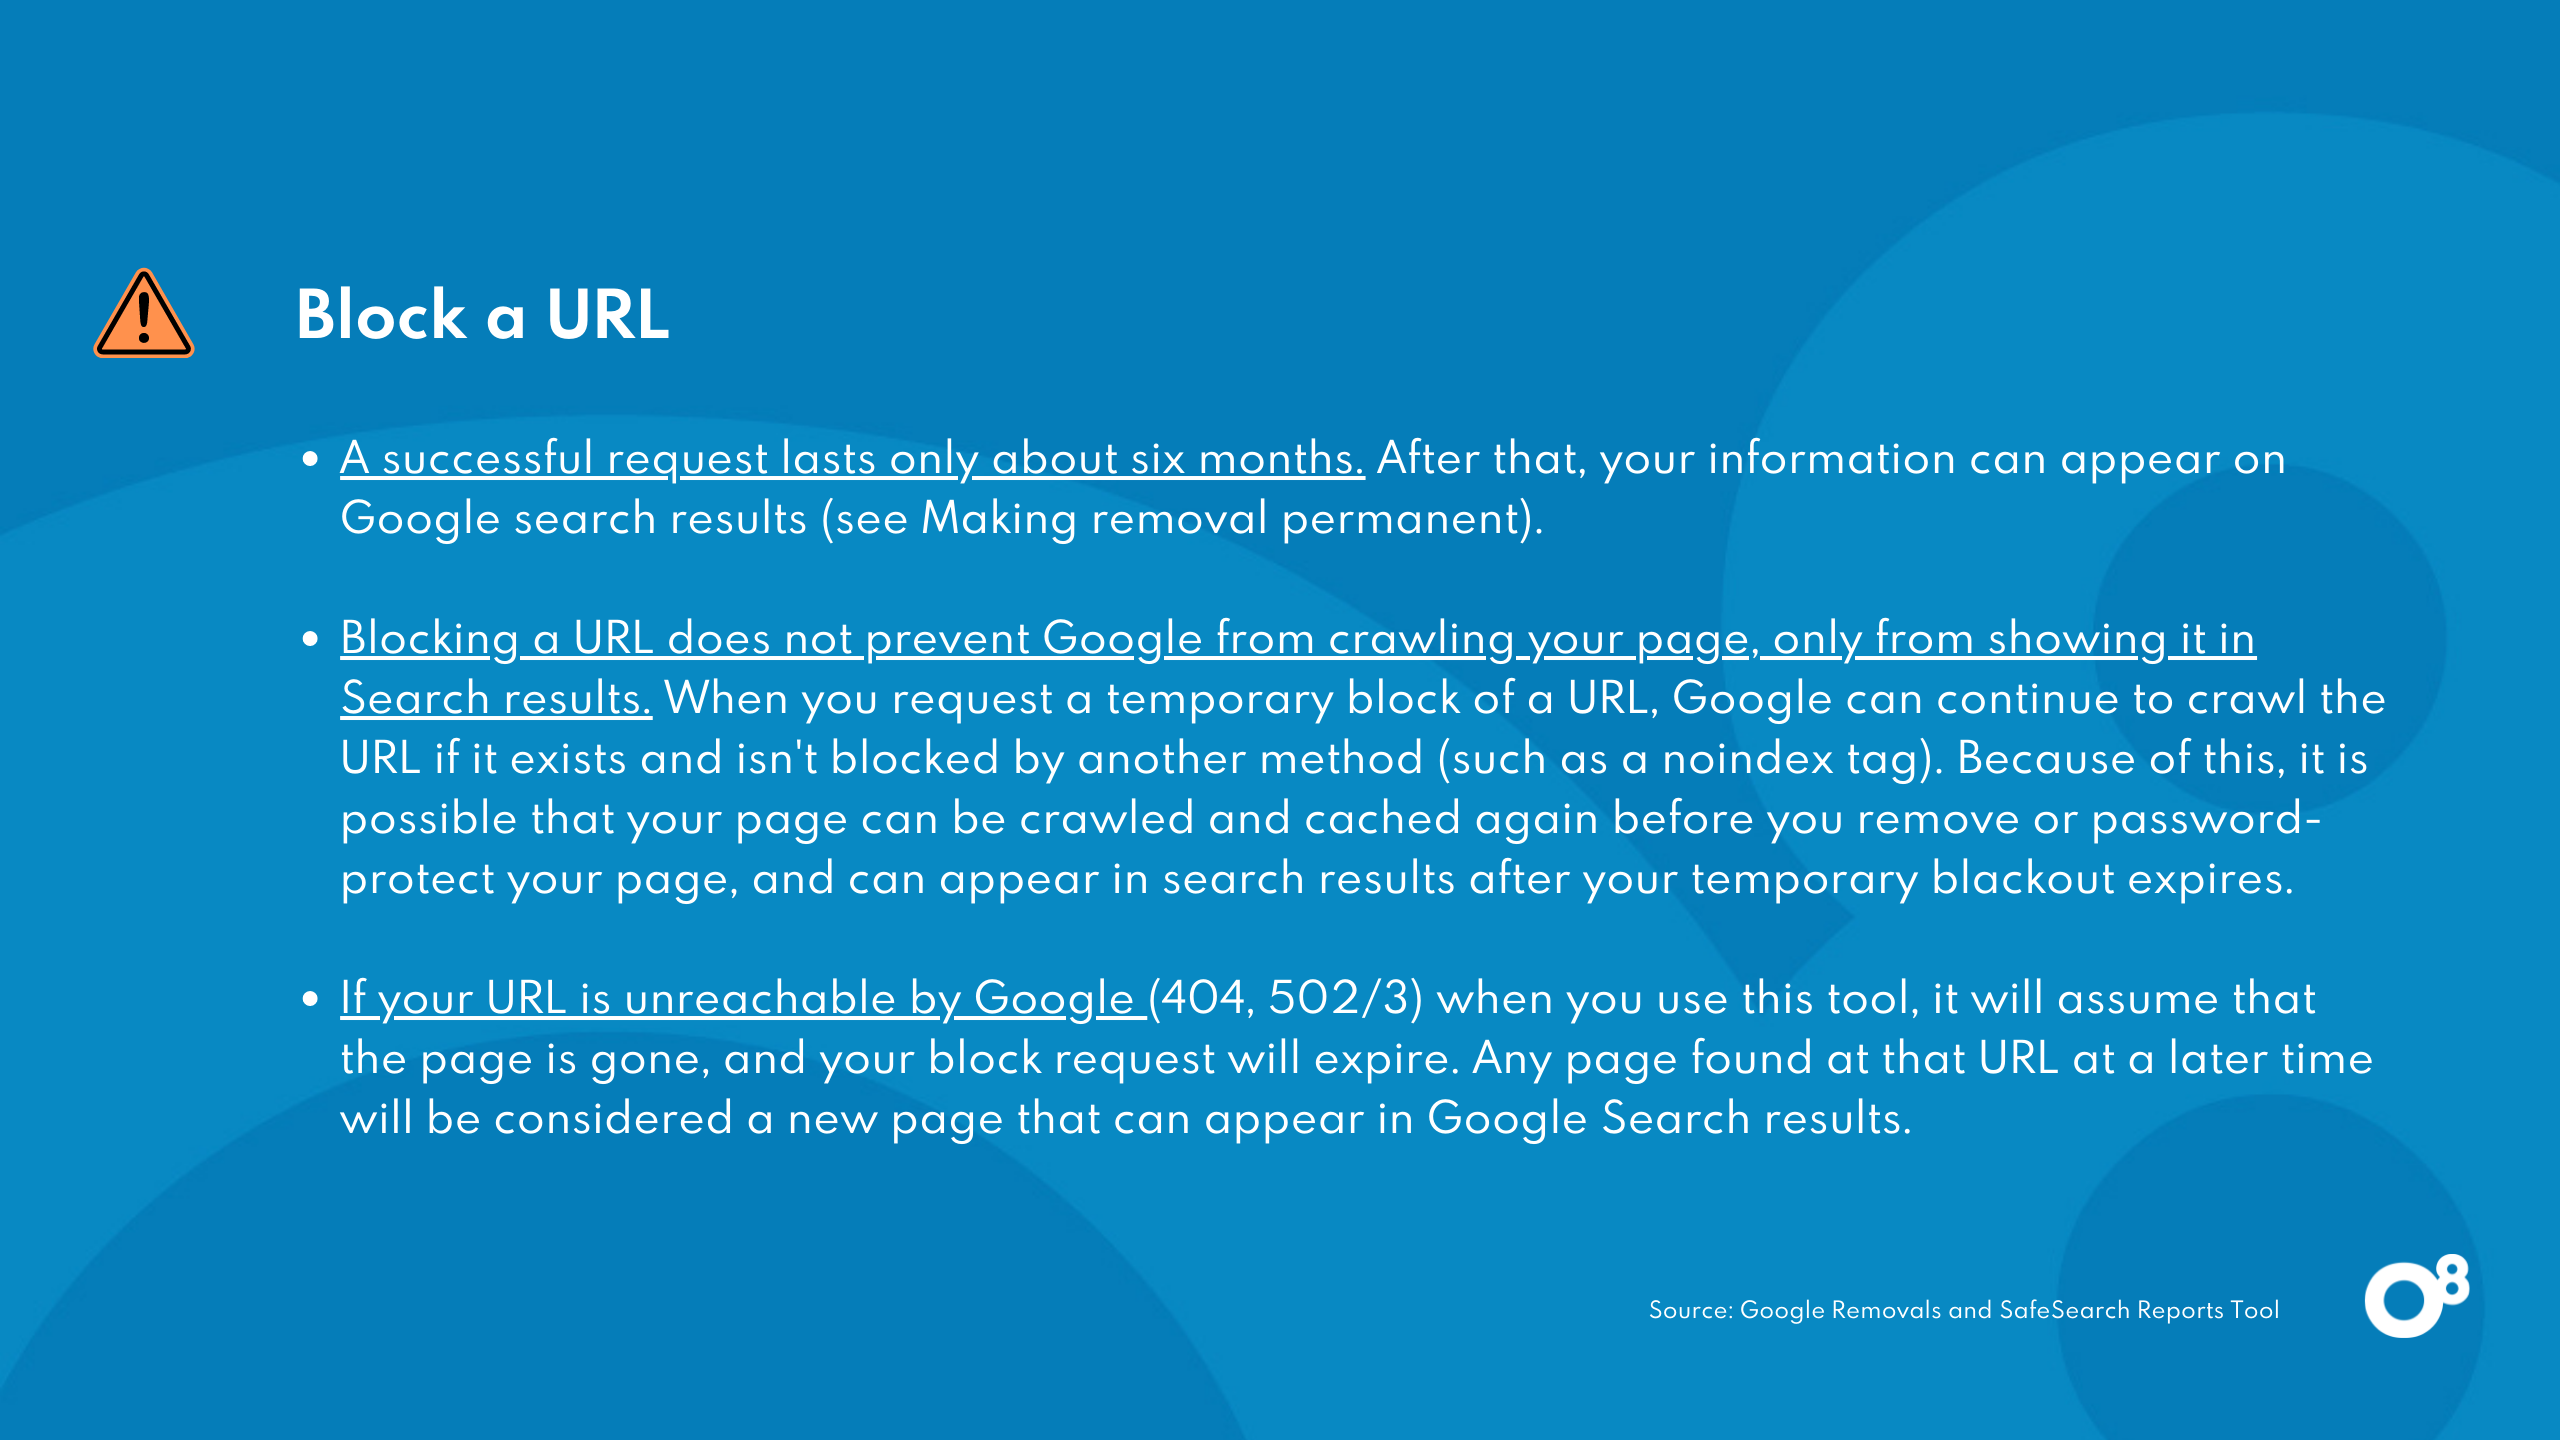 Google Removals and SafeSearch Reports Tool